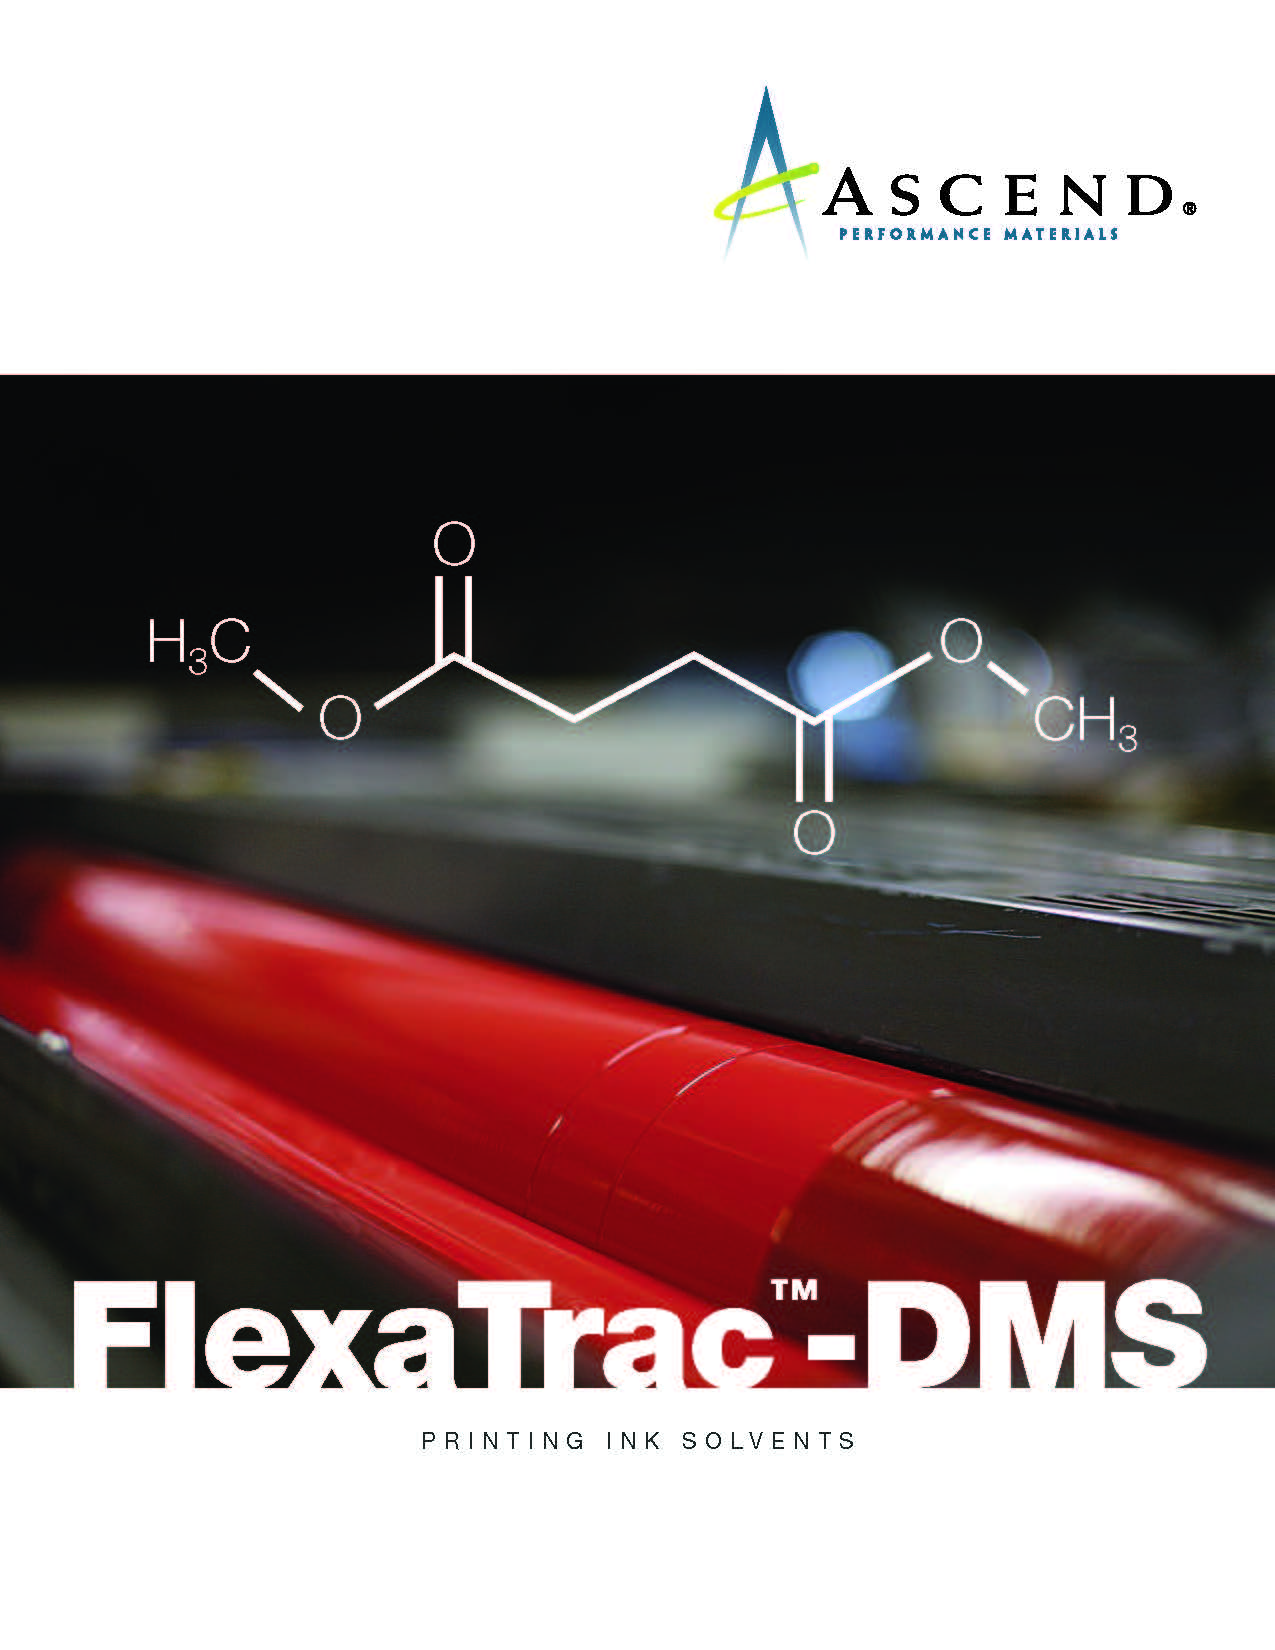 FlexaTrac®-DMS for printing ink solvents